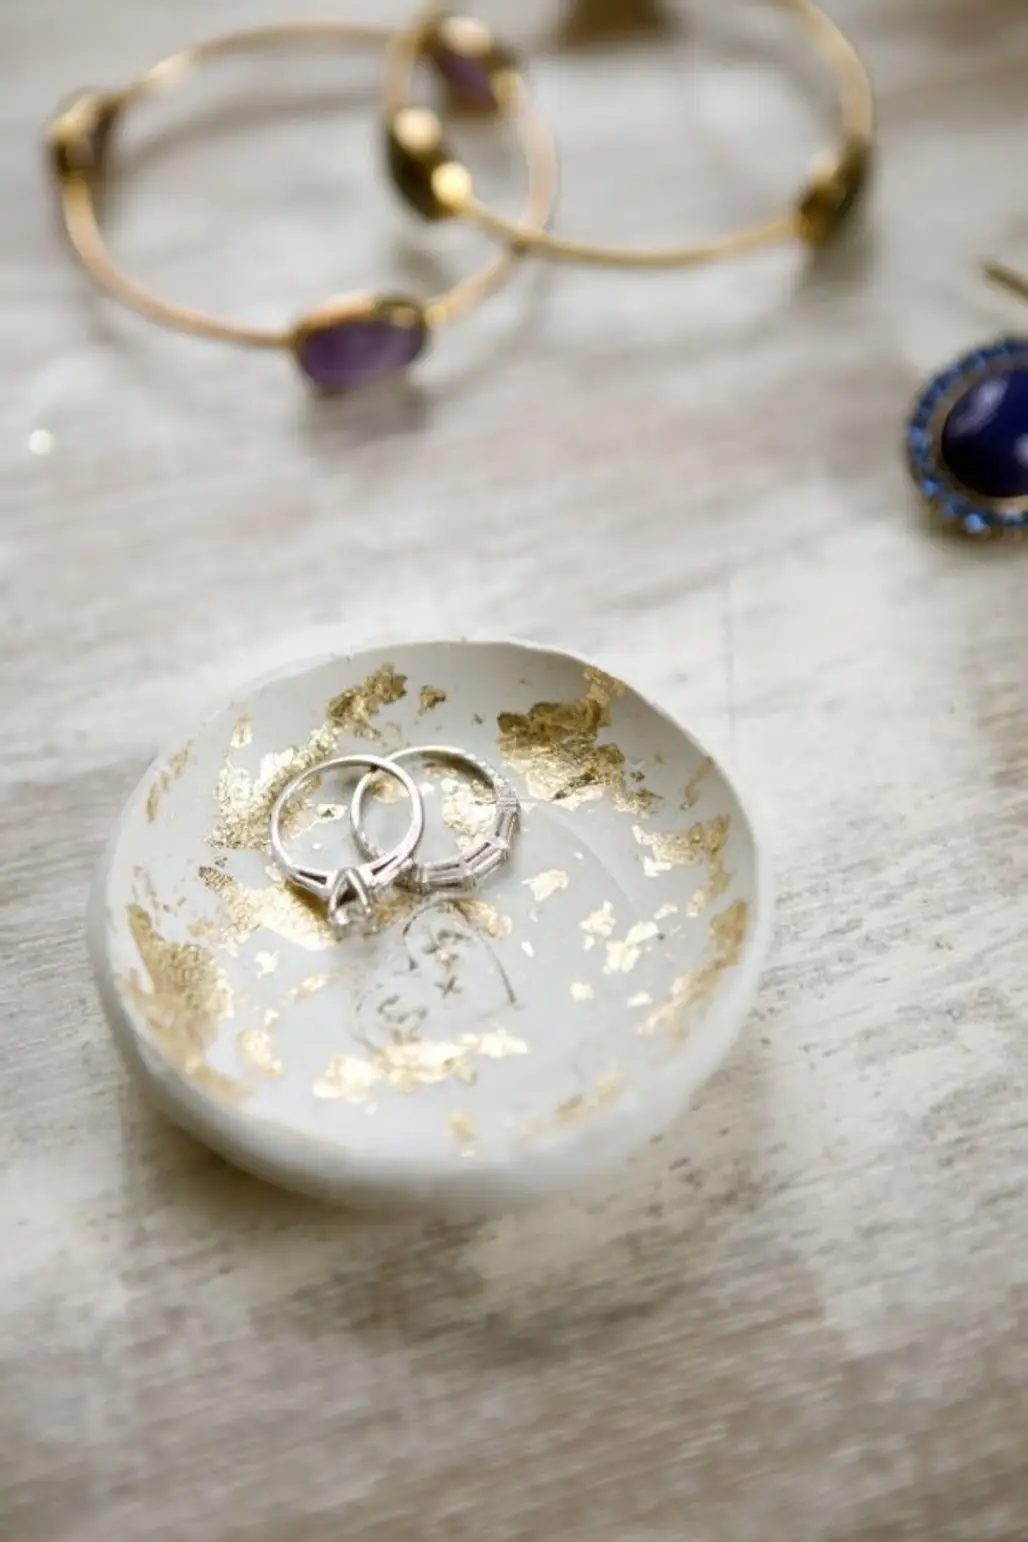 DIY Clay Ring Bowl with Gold Leaf - Would Be Good for Putting by the Sink